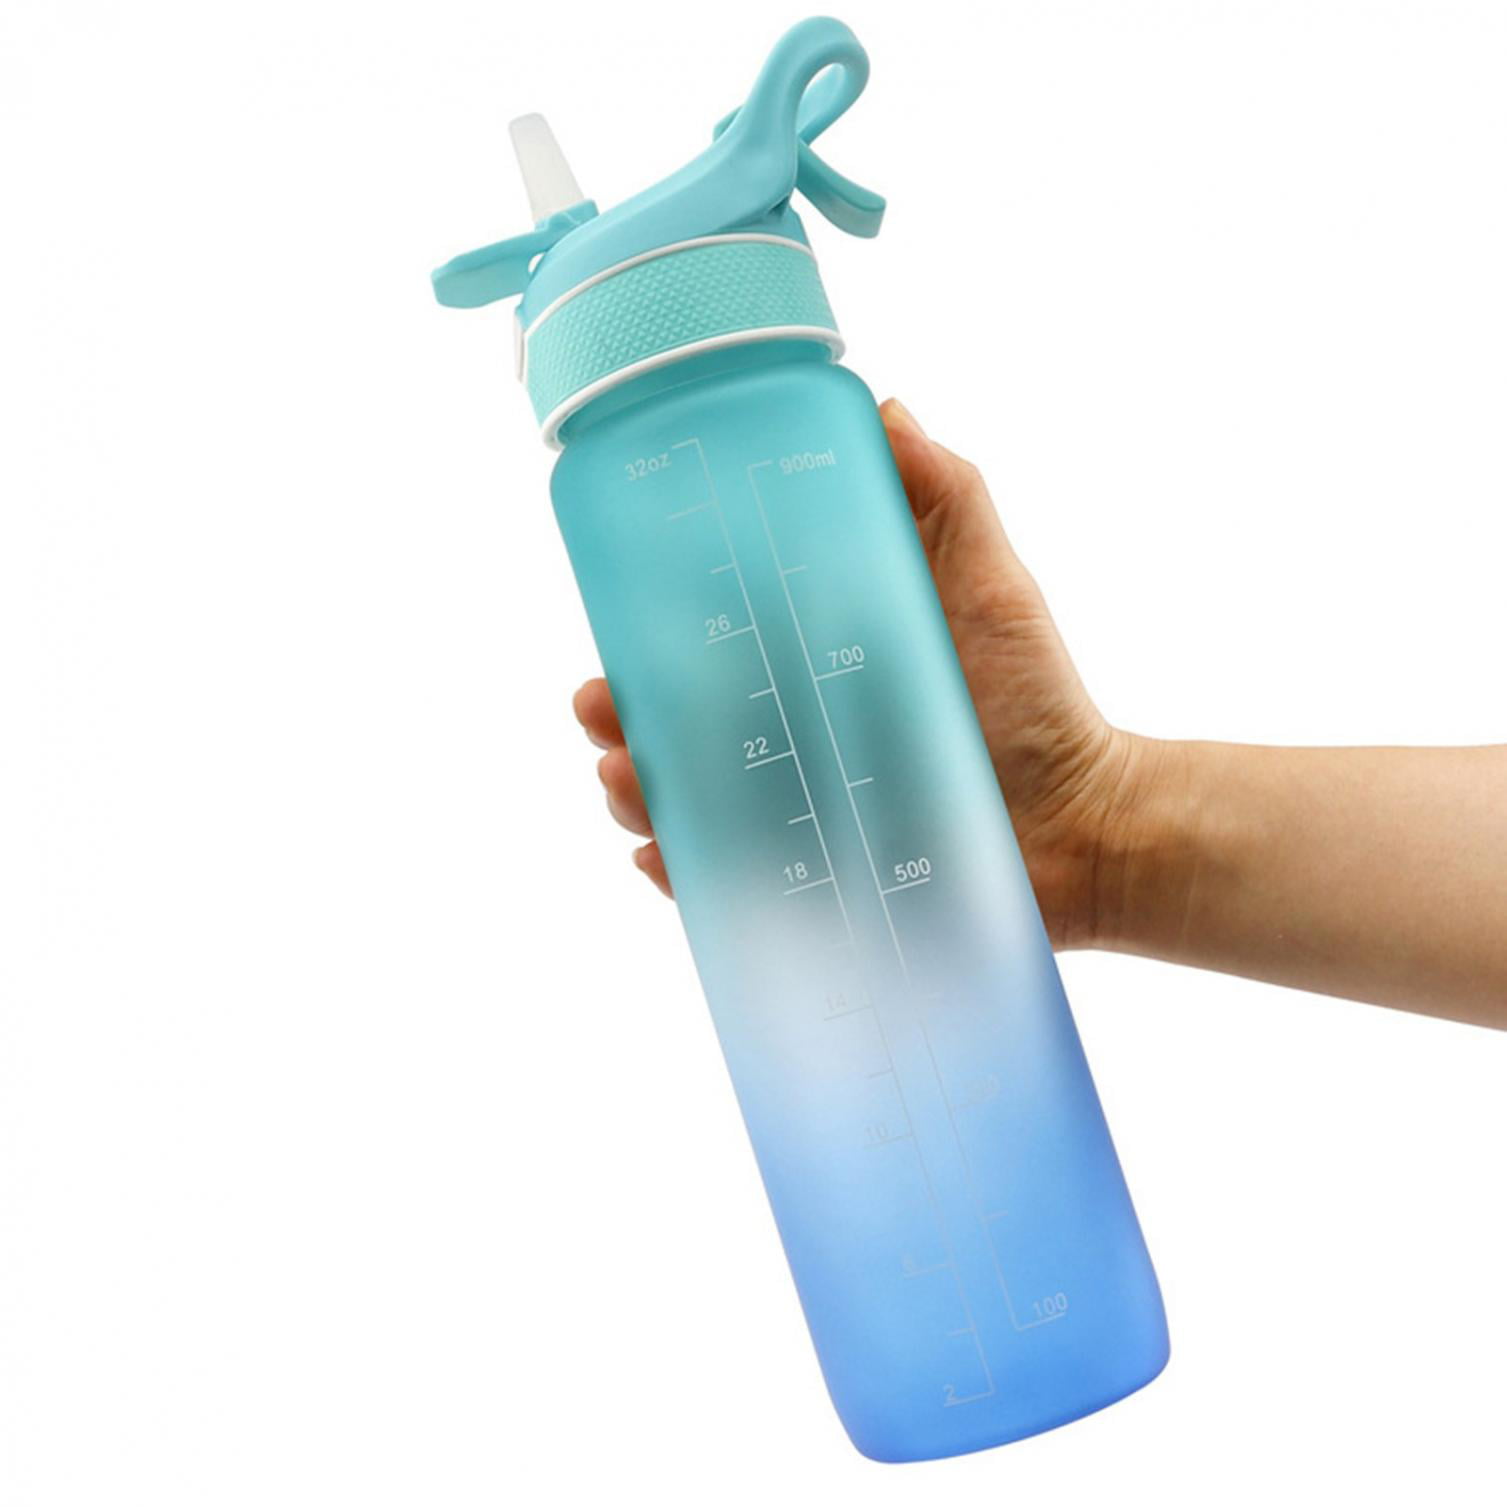 Eqwljwe 32 oz Water Bottle with Time Marker | BPA Free | Leak Proof | Measures How Much Water You Drink | Best Water Bottle to Stay Hydrated All Day